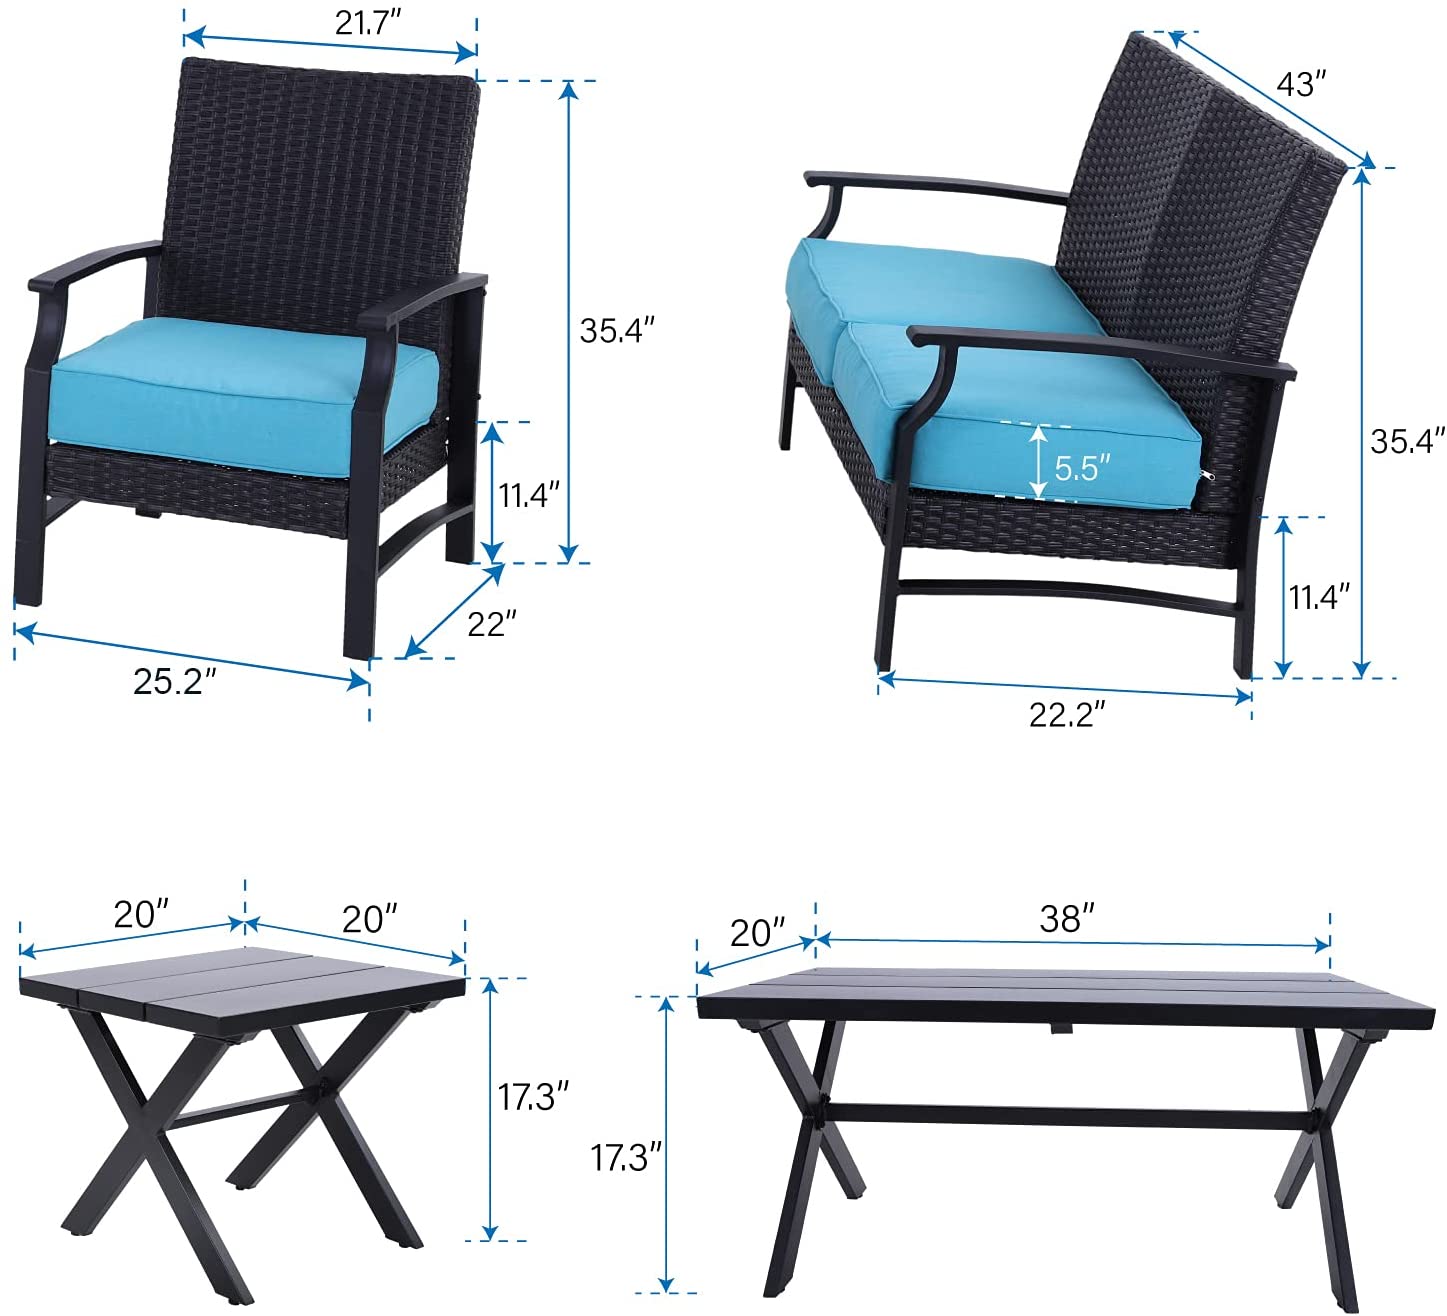 Sophia & William Patio Rattan Sofa Seating Group with Cushions, Outdoor Conversation Set